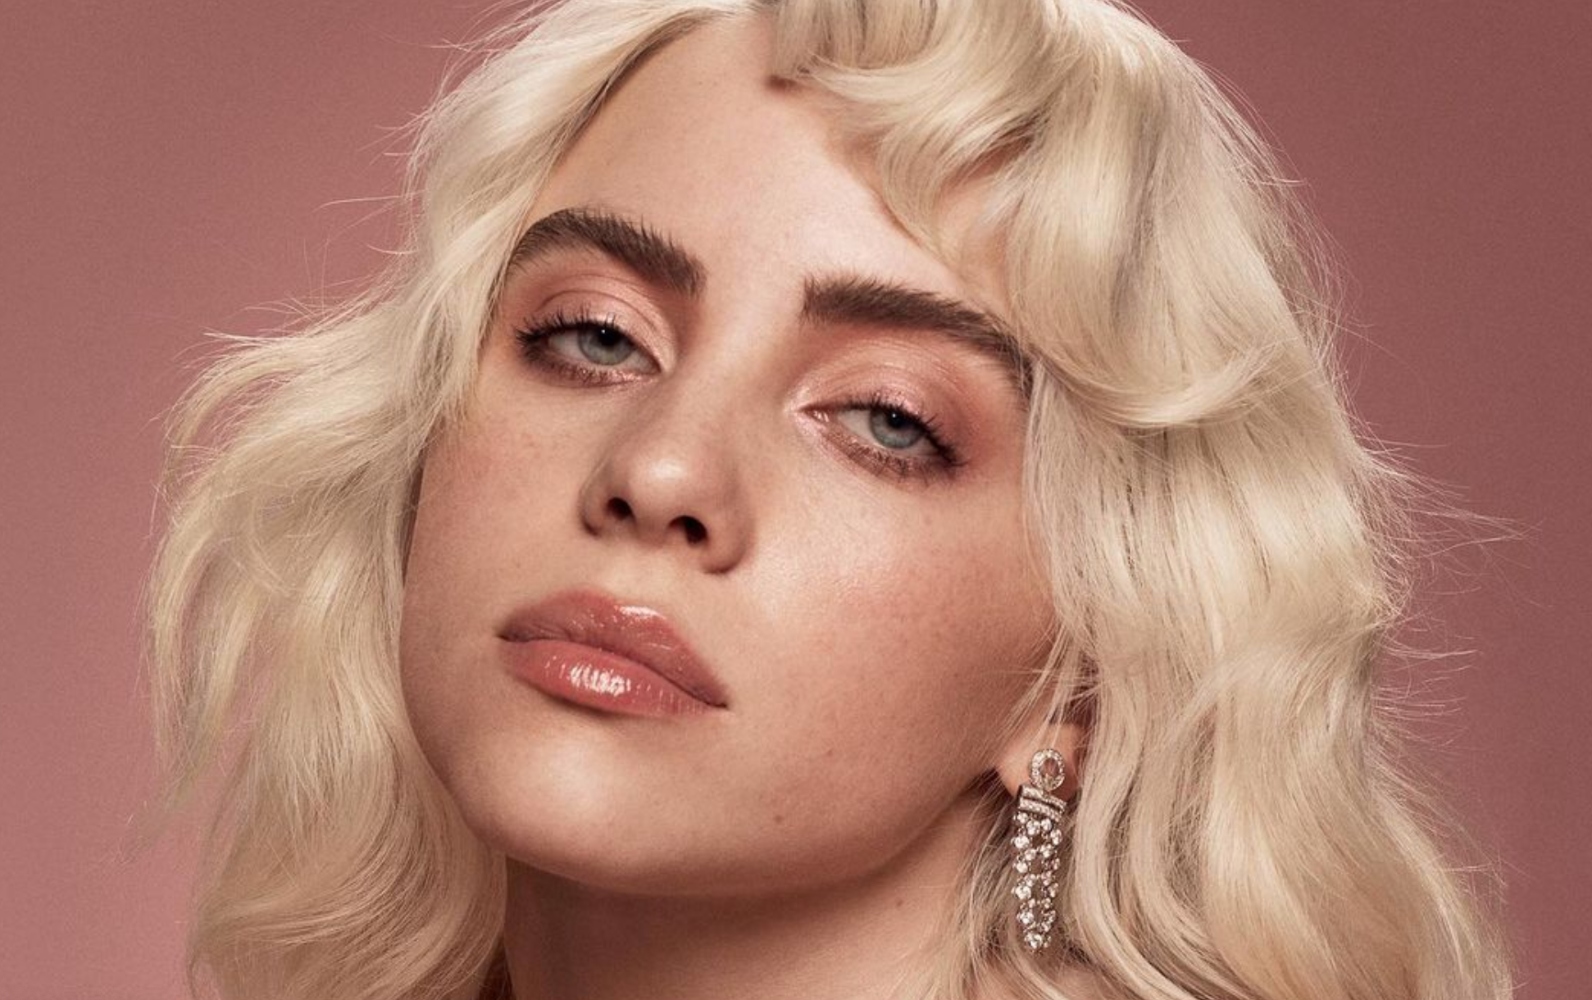 Billie Eilish's Blonde Hair Is the Perfect Summer Hair Color - wide 6